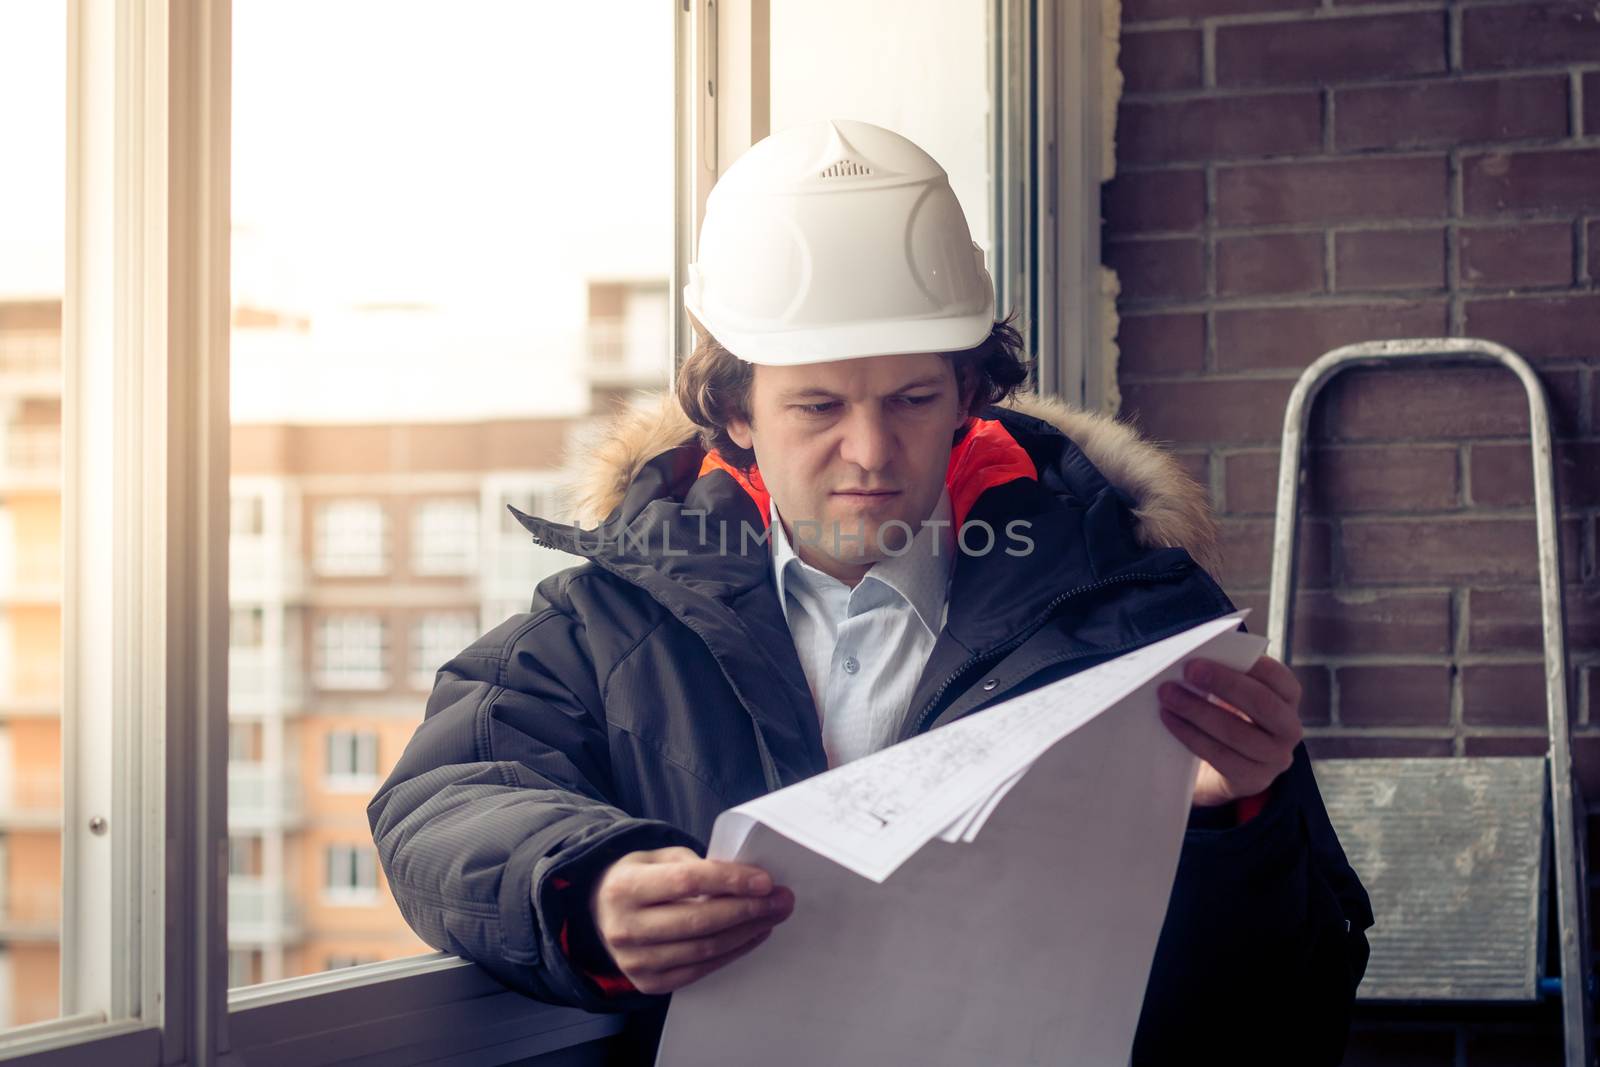 Working engineer in a white construction helmet with a project or drawing plan on the background of an industrial plant. Soft focus, toned